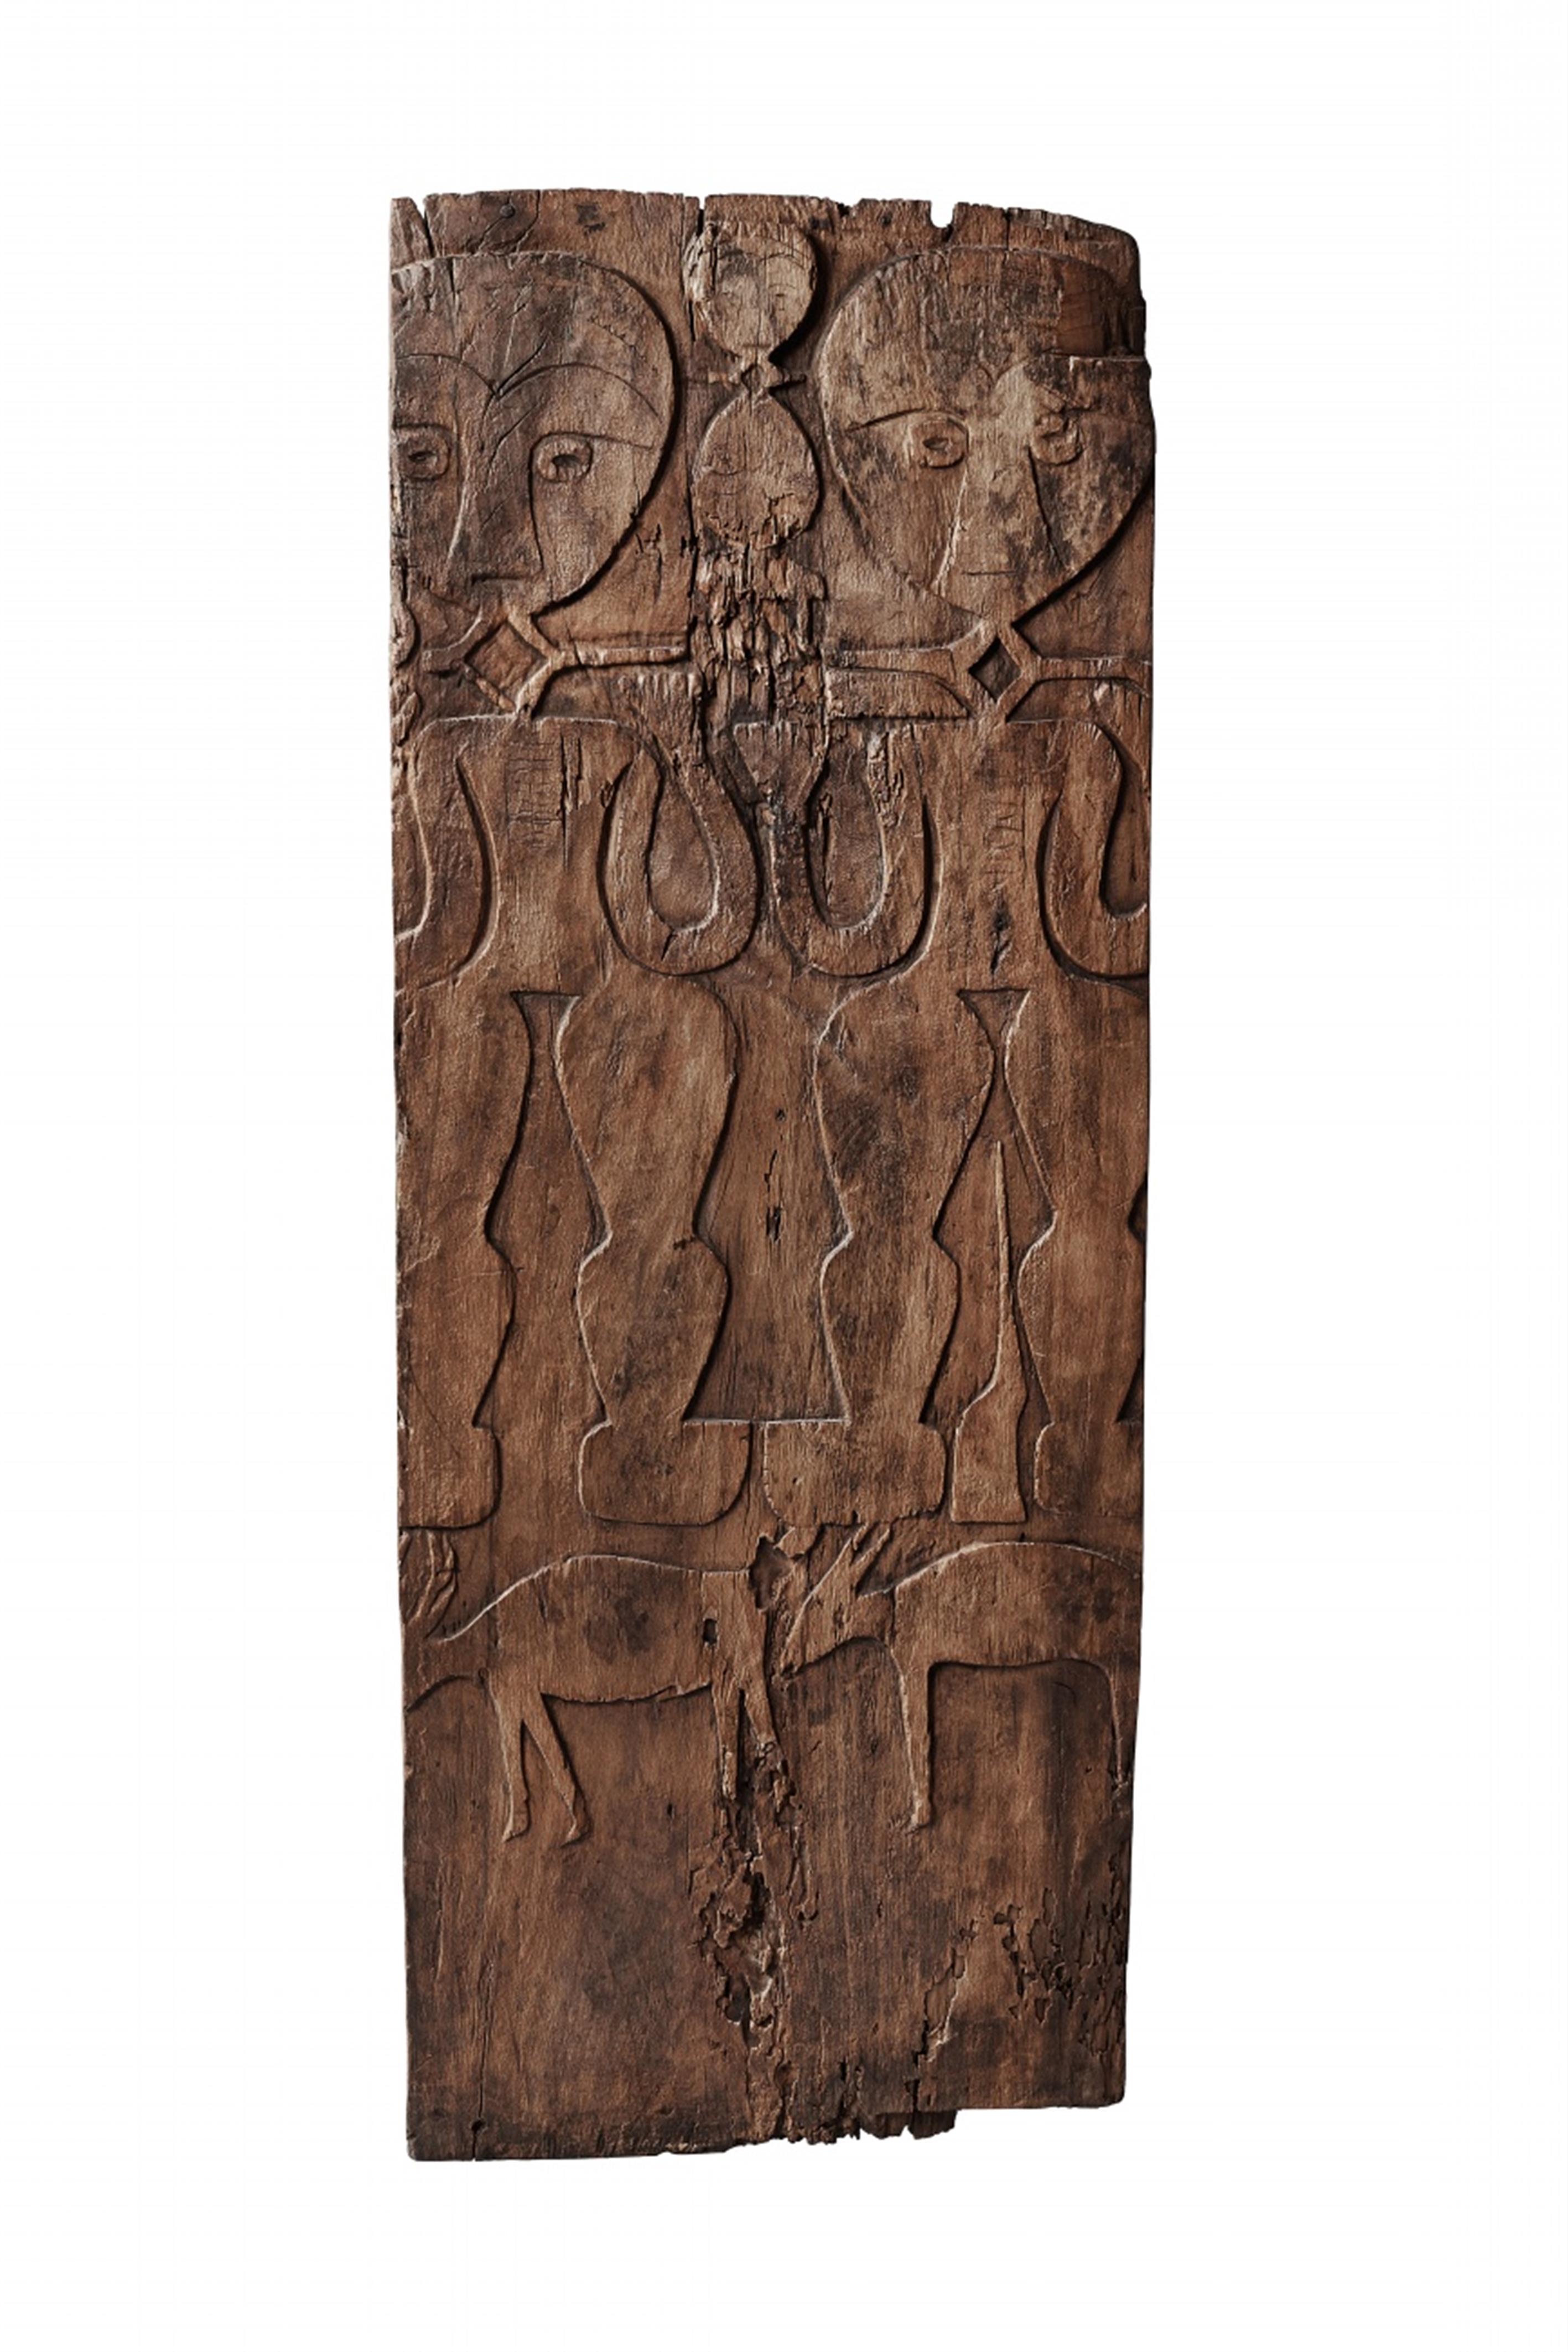 A PAIWAN HOUSE PANEL - image-1